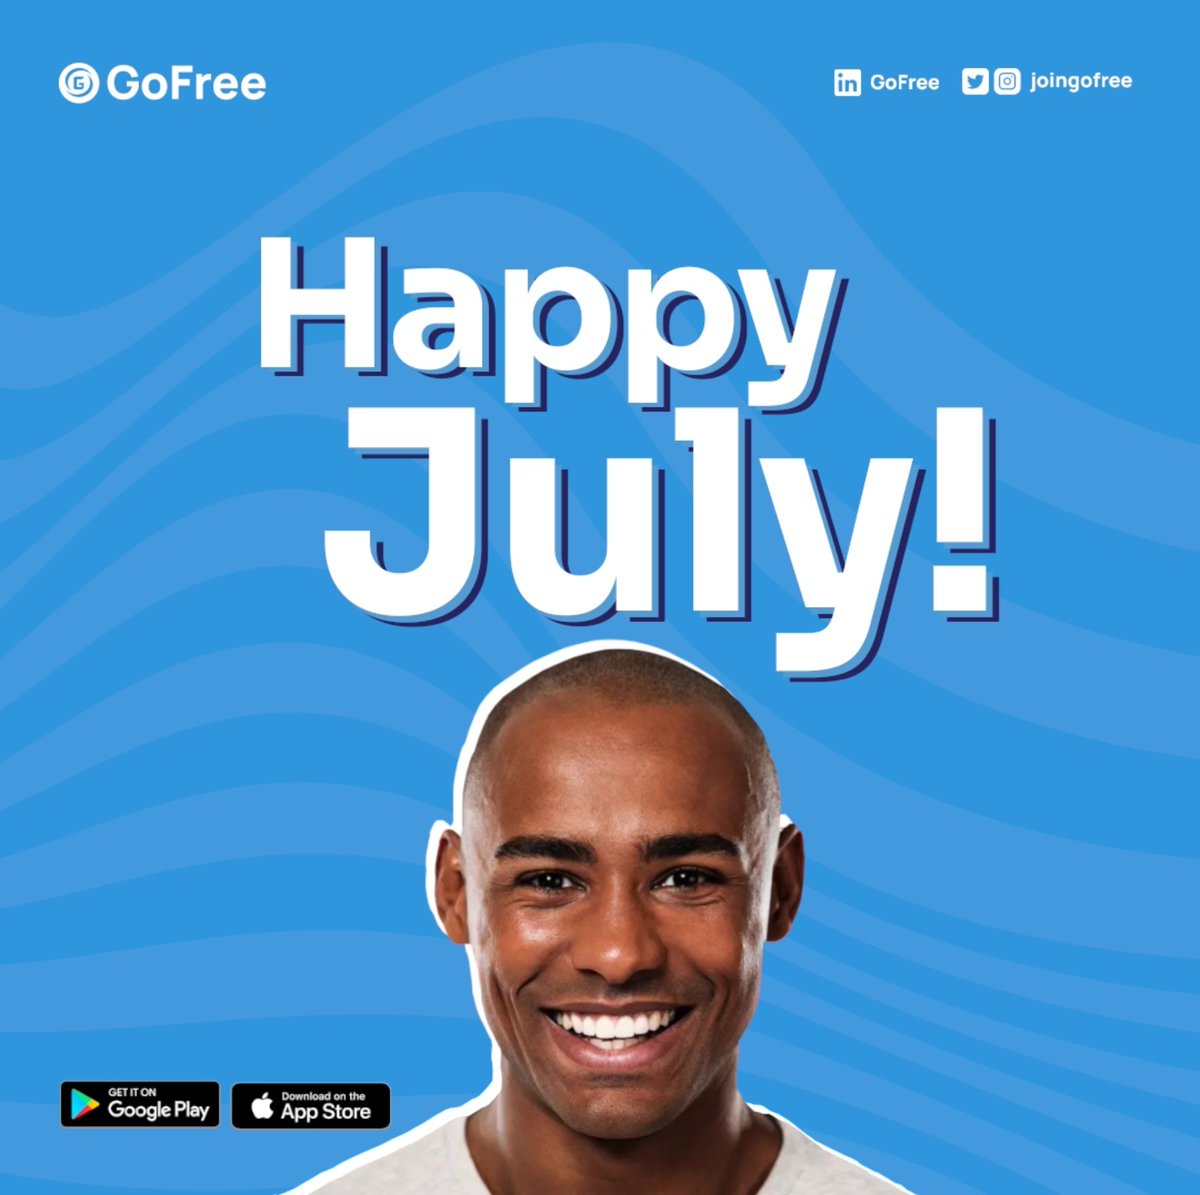 We’re excited to start the last half of the year with you 🎉

Together, let's continue the next half of the year using #Gofree for Freedom

Your #1 Social Neobank